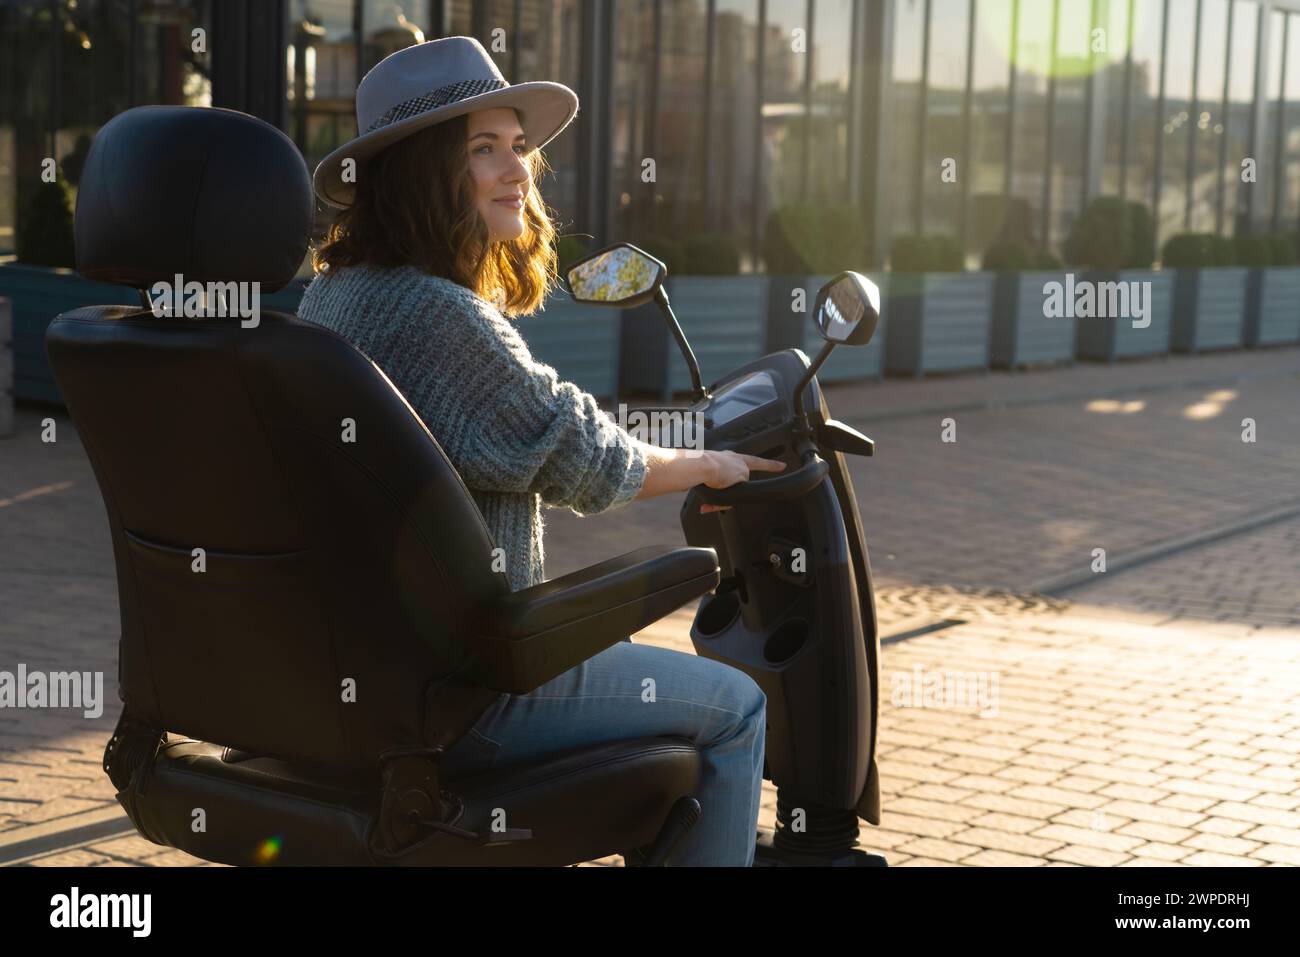 Woman tourist riding a four wheel mobility electric scooter on a city street.. Stock Photo